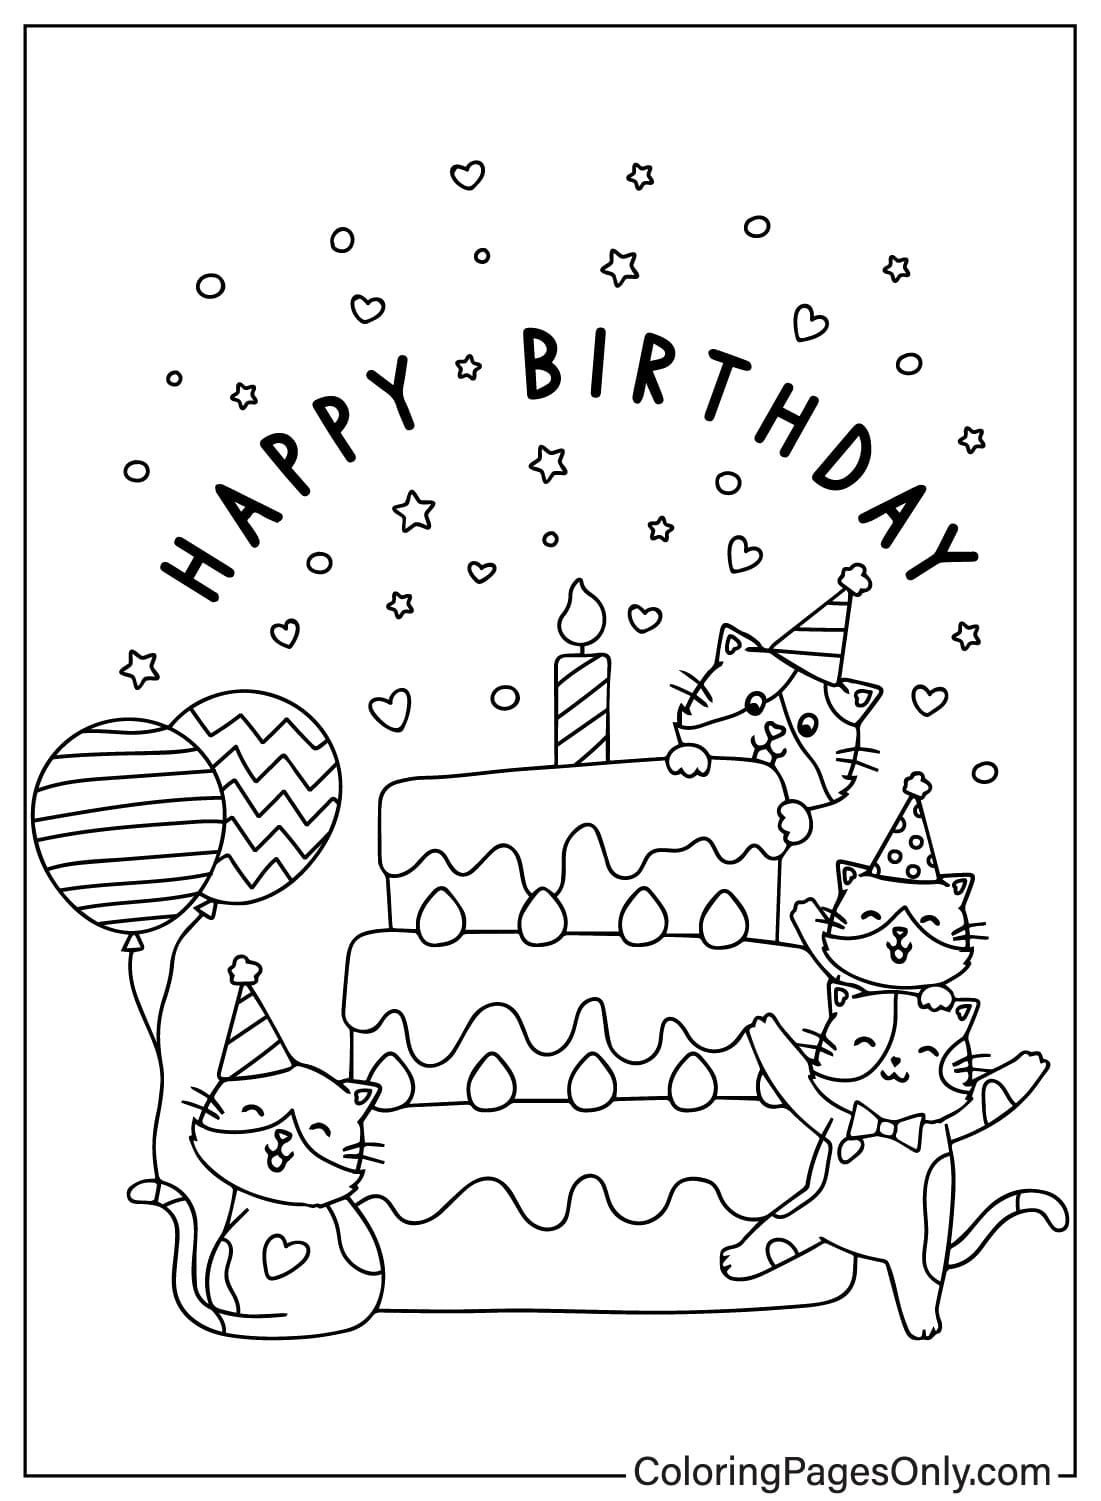 Happy Birthday Cake Coloring Page from Birthday Cake